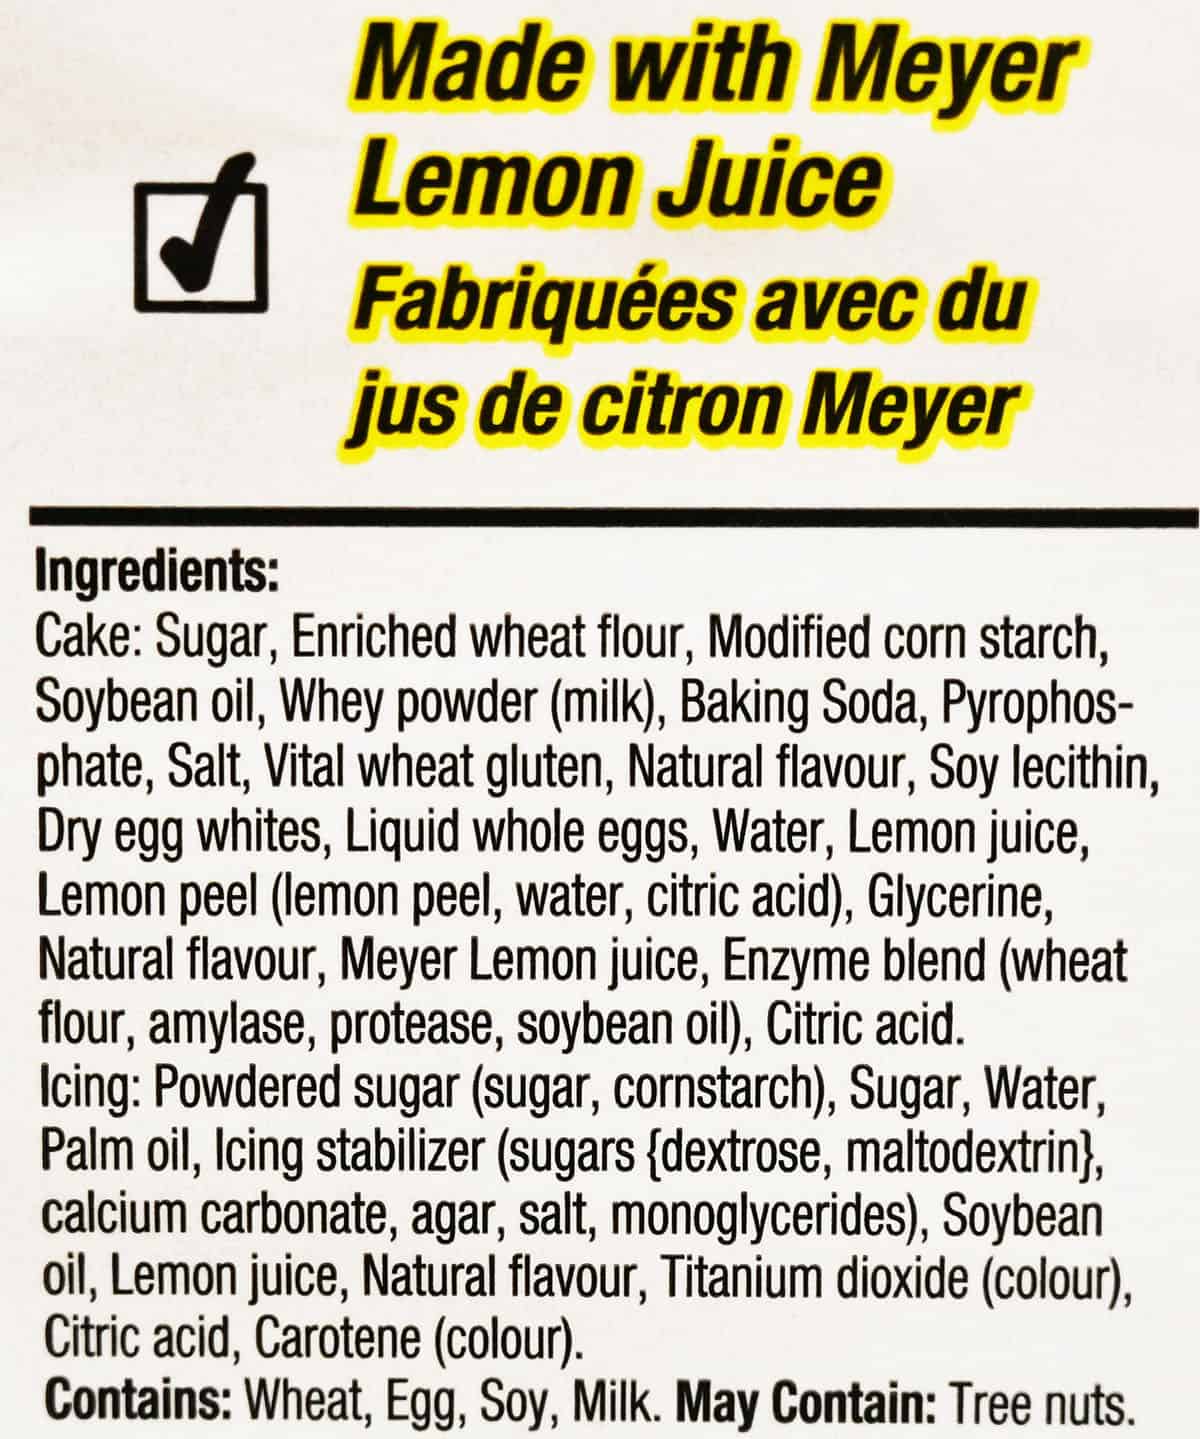 Ingredients list from package label.